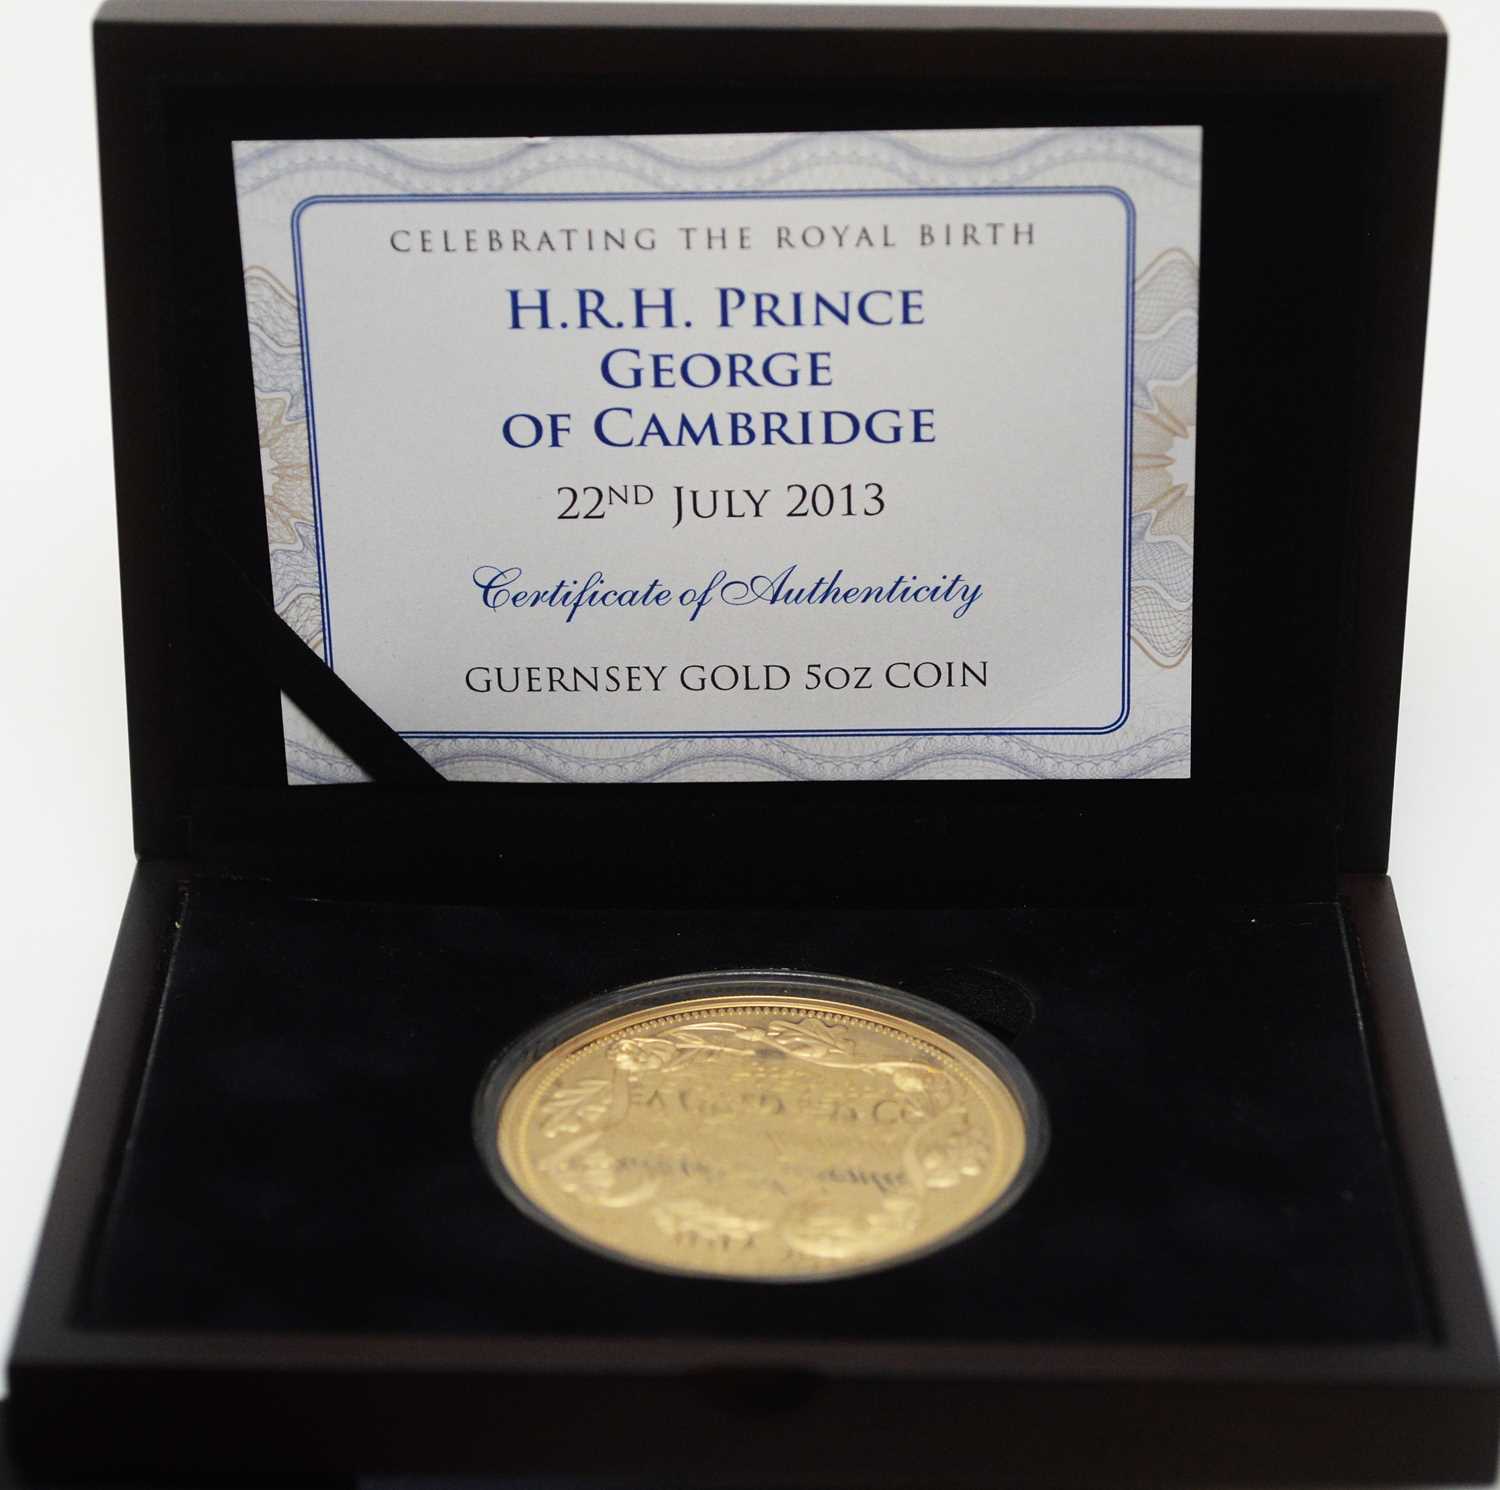 28 - The Royal Birth of H.R.H. Prince George of Cambridge 22nd July 2013 £10 gold coin